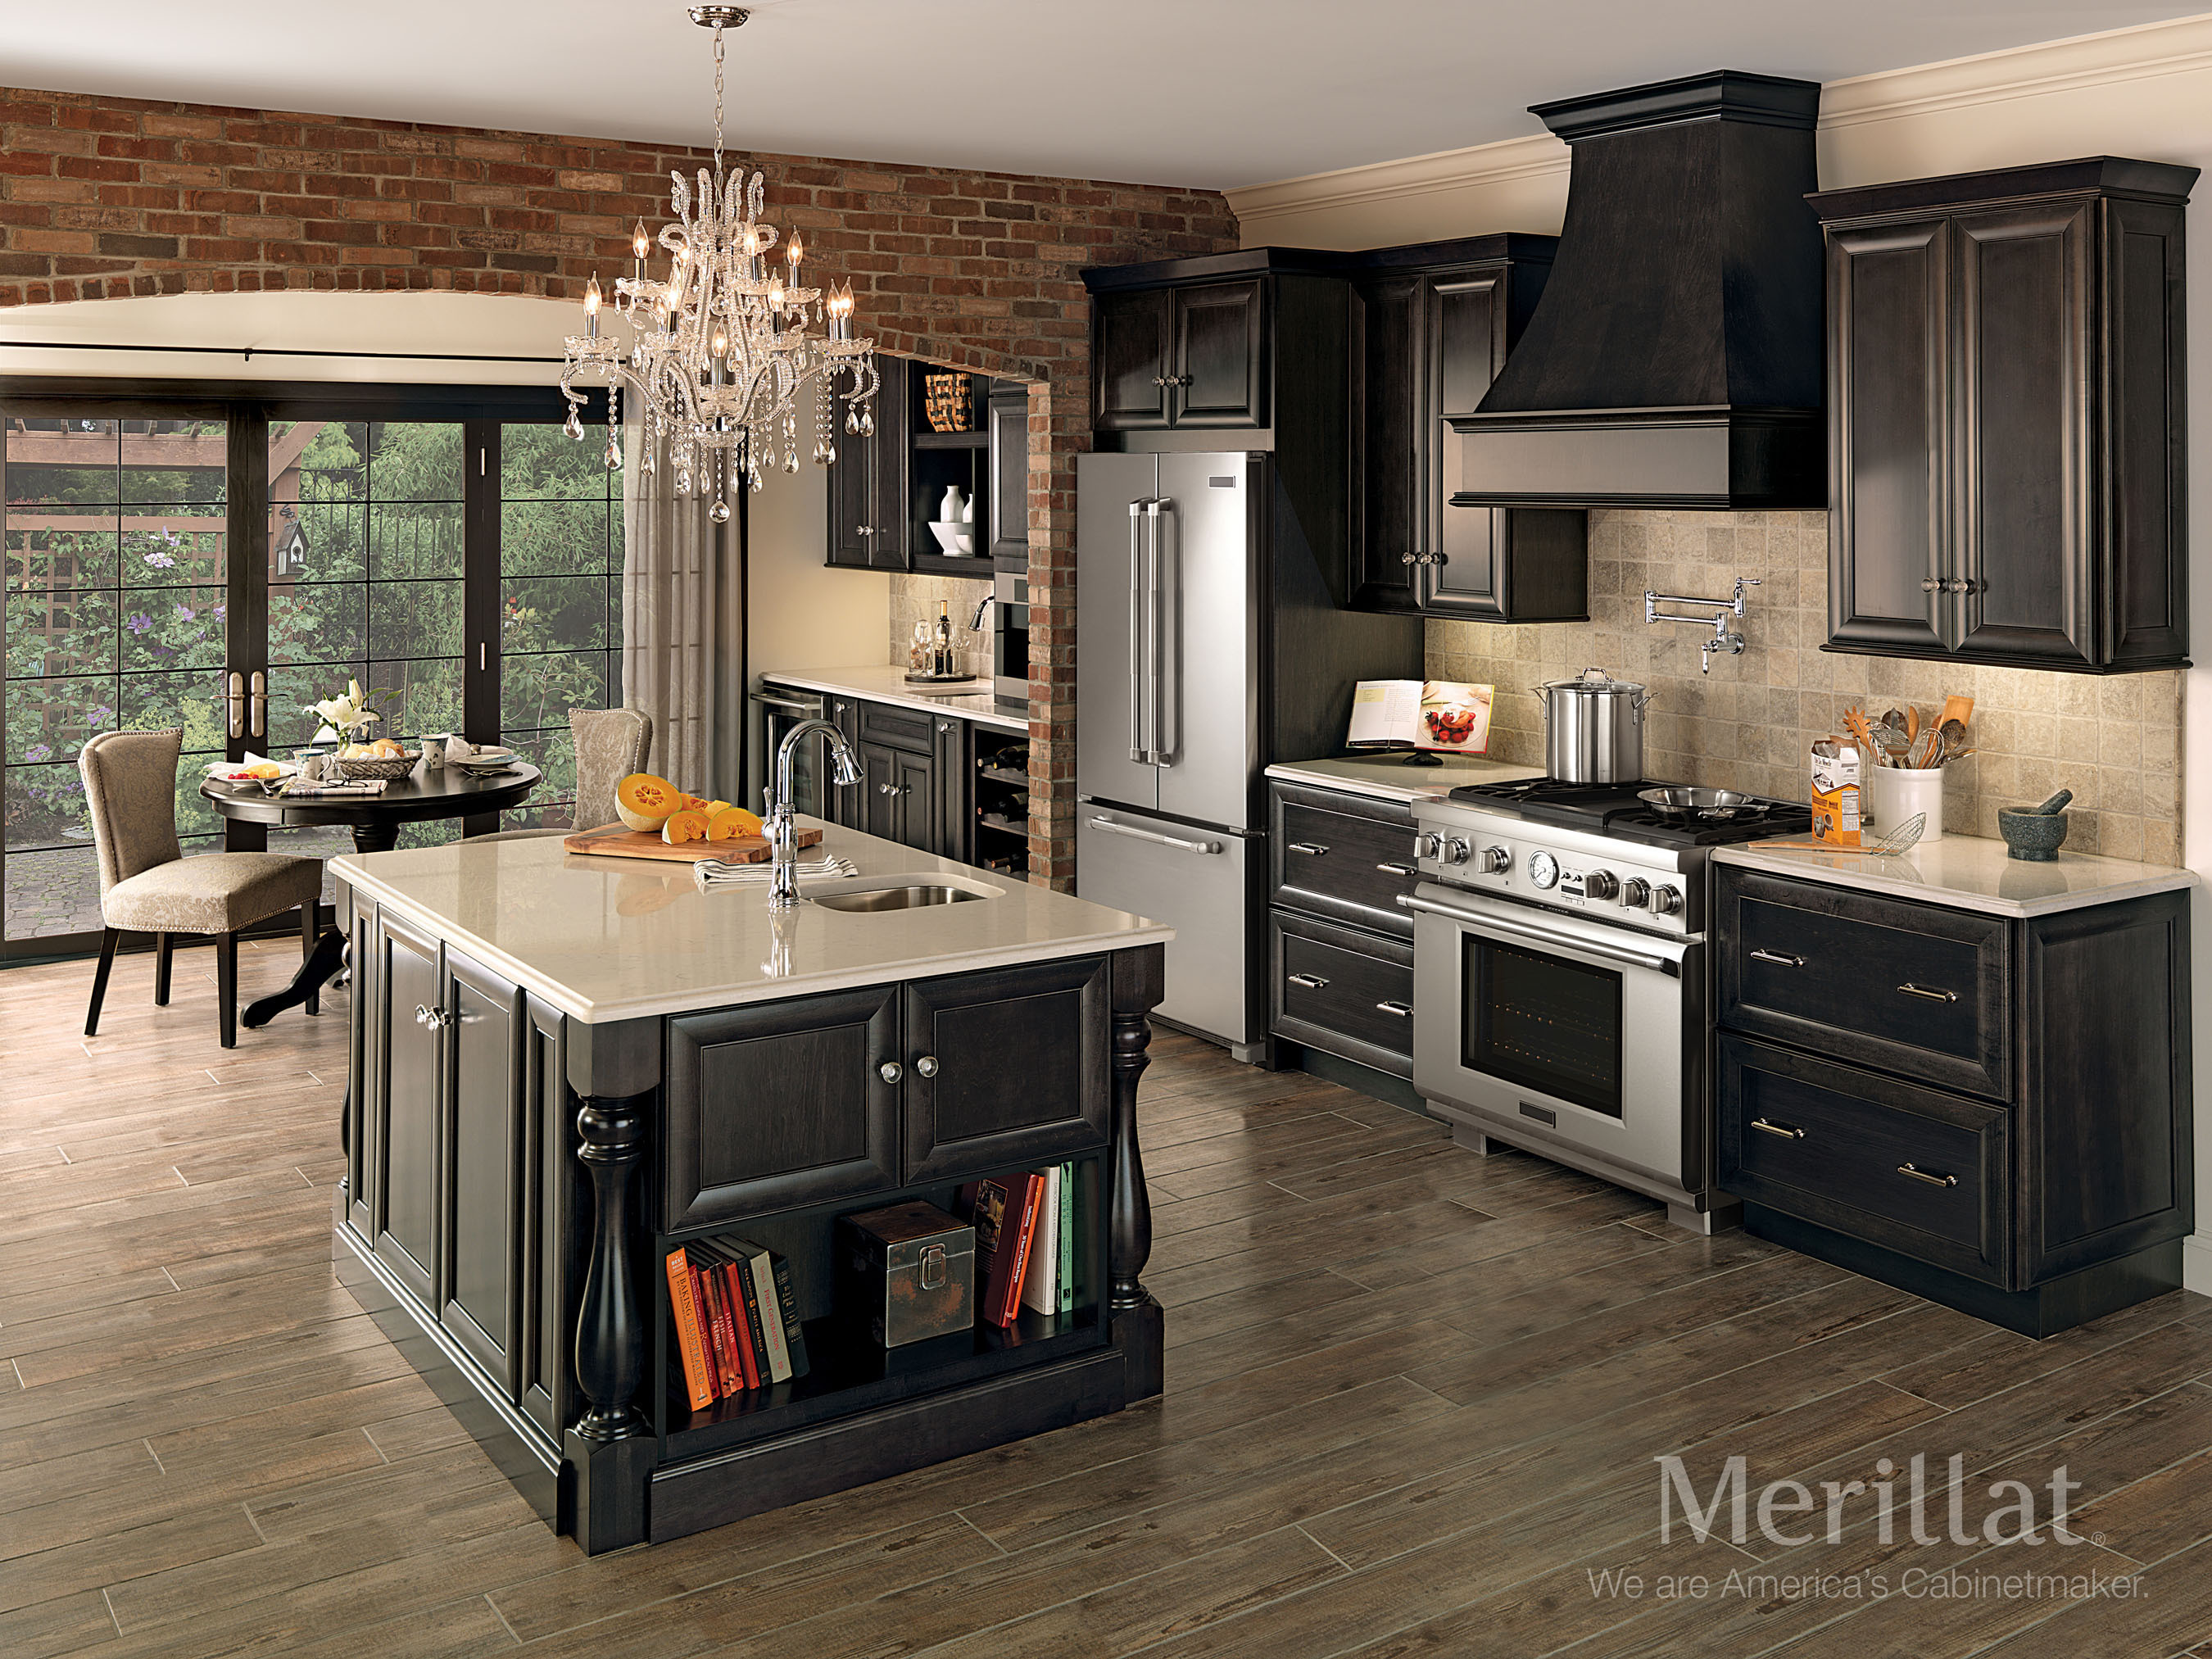 Merillat Cabinetry To Showcase New Product Launch At Kbis 2017